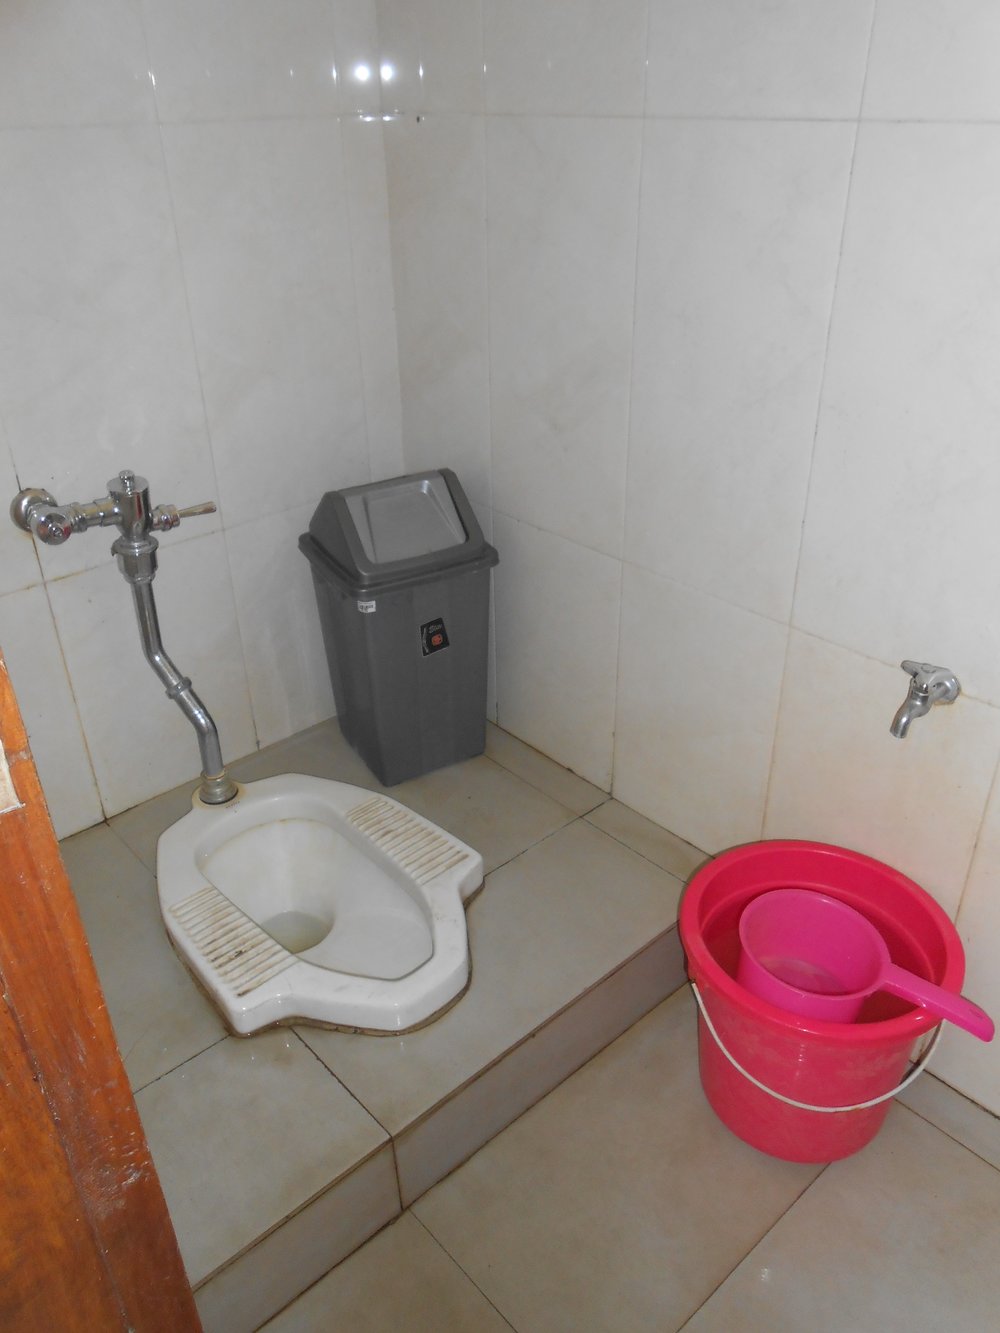   Indonesia squat toilet with water bucket  